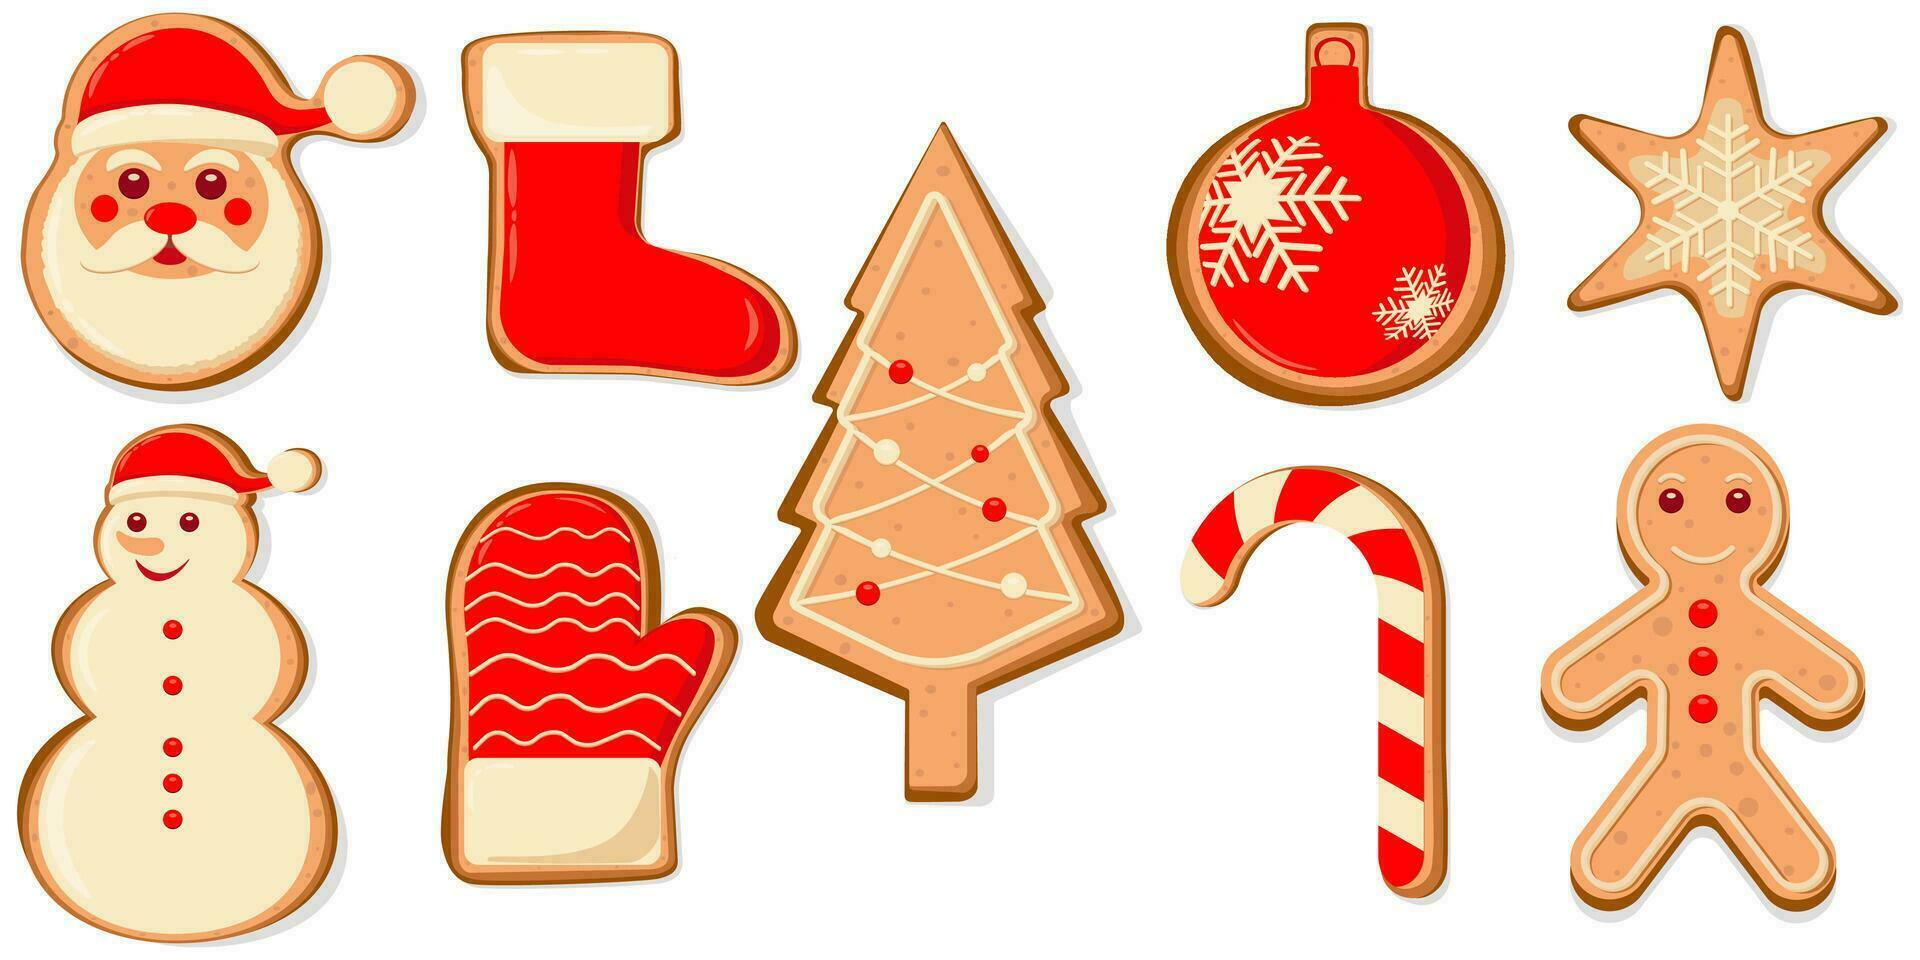 Christmas gingerbread cookies, winter holiday food. Christmas tree, candy cane, santa claus, christmas toy, mitten, snowman, Christmas stocking, star shape, gingerbread man. Vector illustration